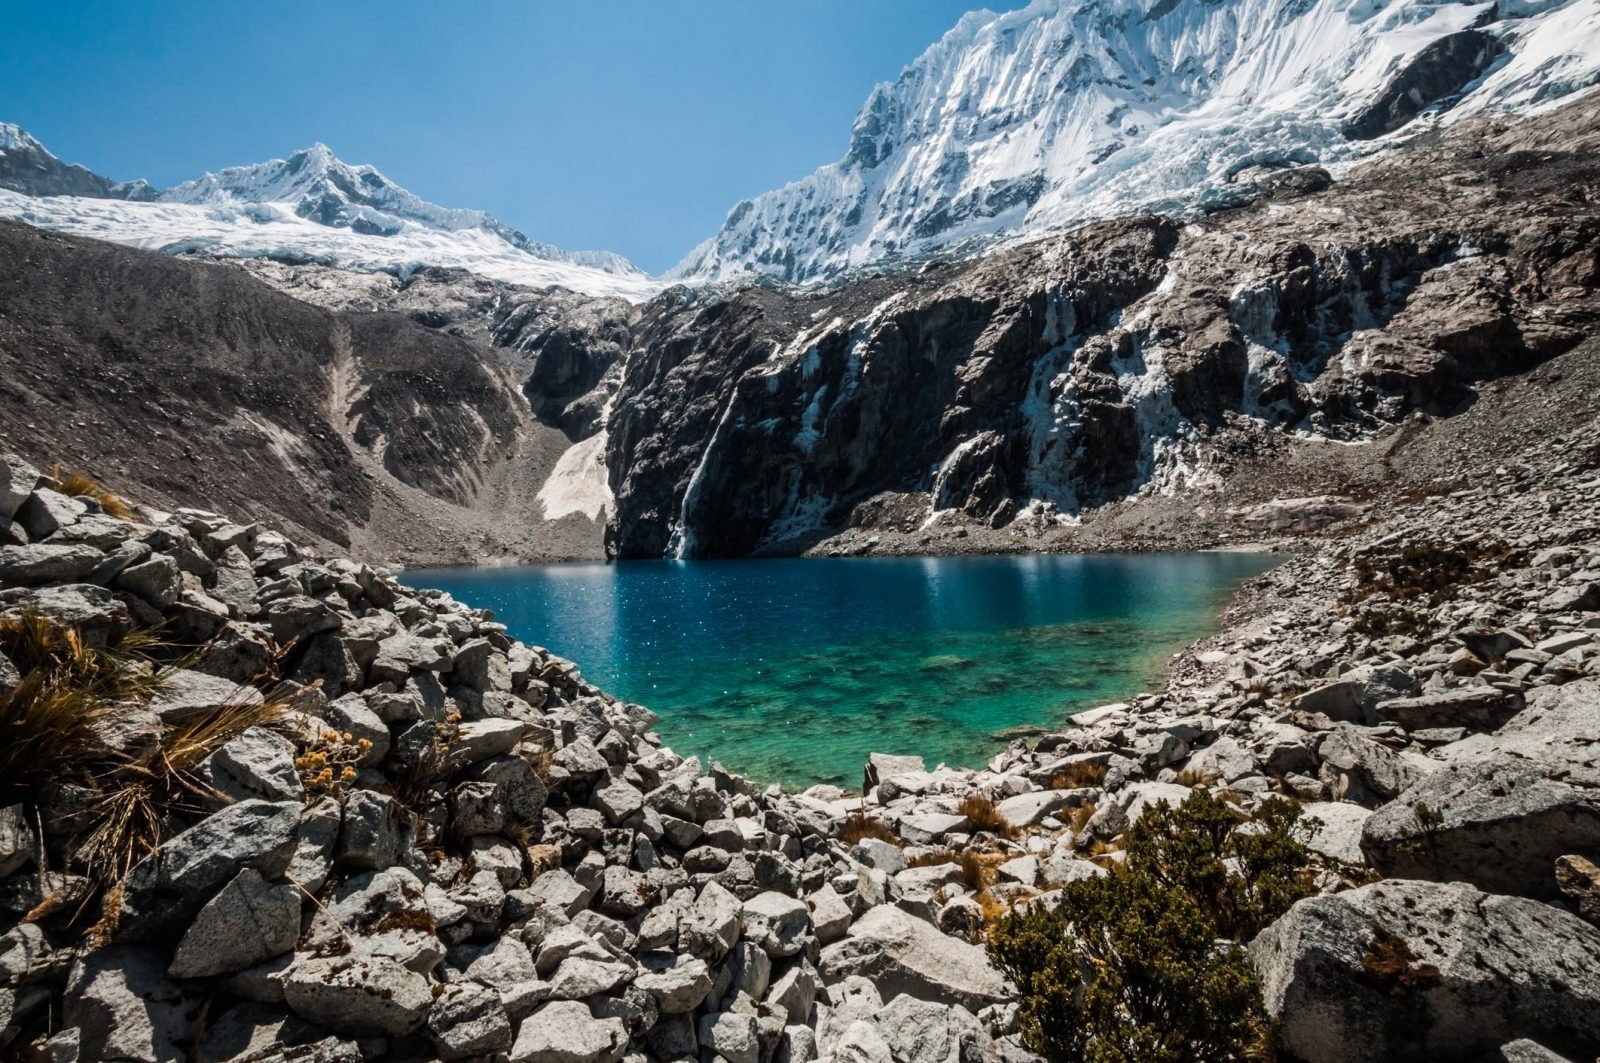 The clear Laguna 69 lake with Mount Pisco in the background, Peru.